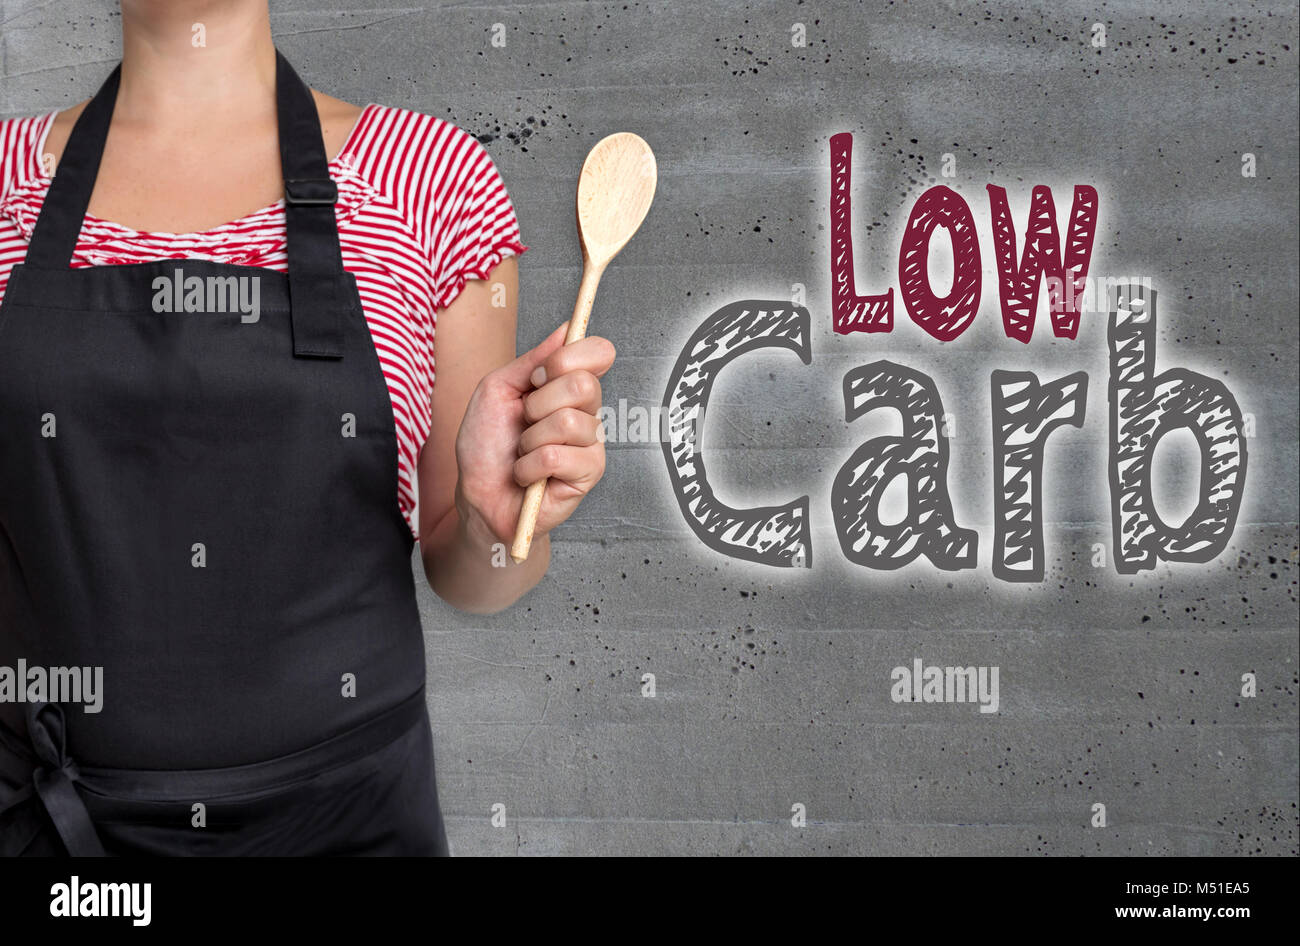 Low Carb concept is shown by cook. Stock Photo